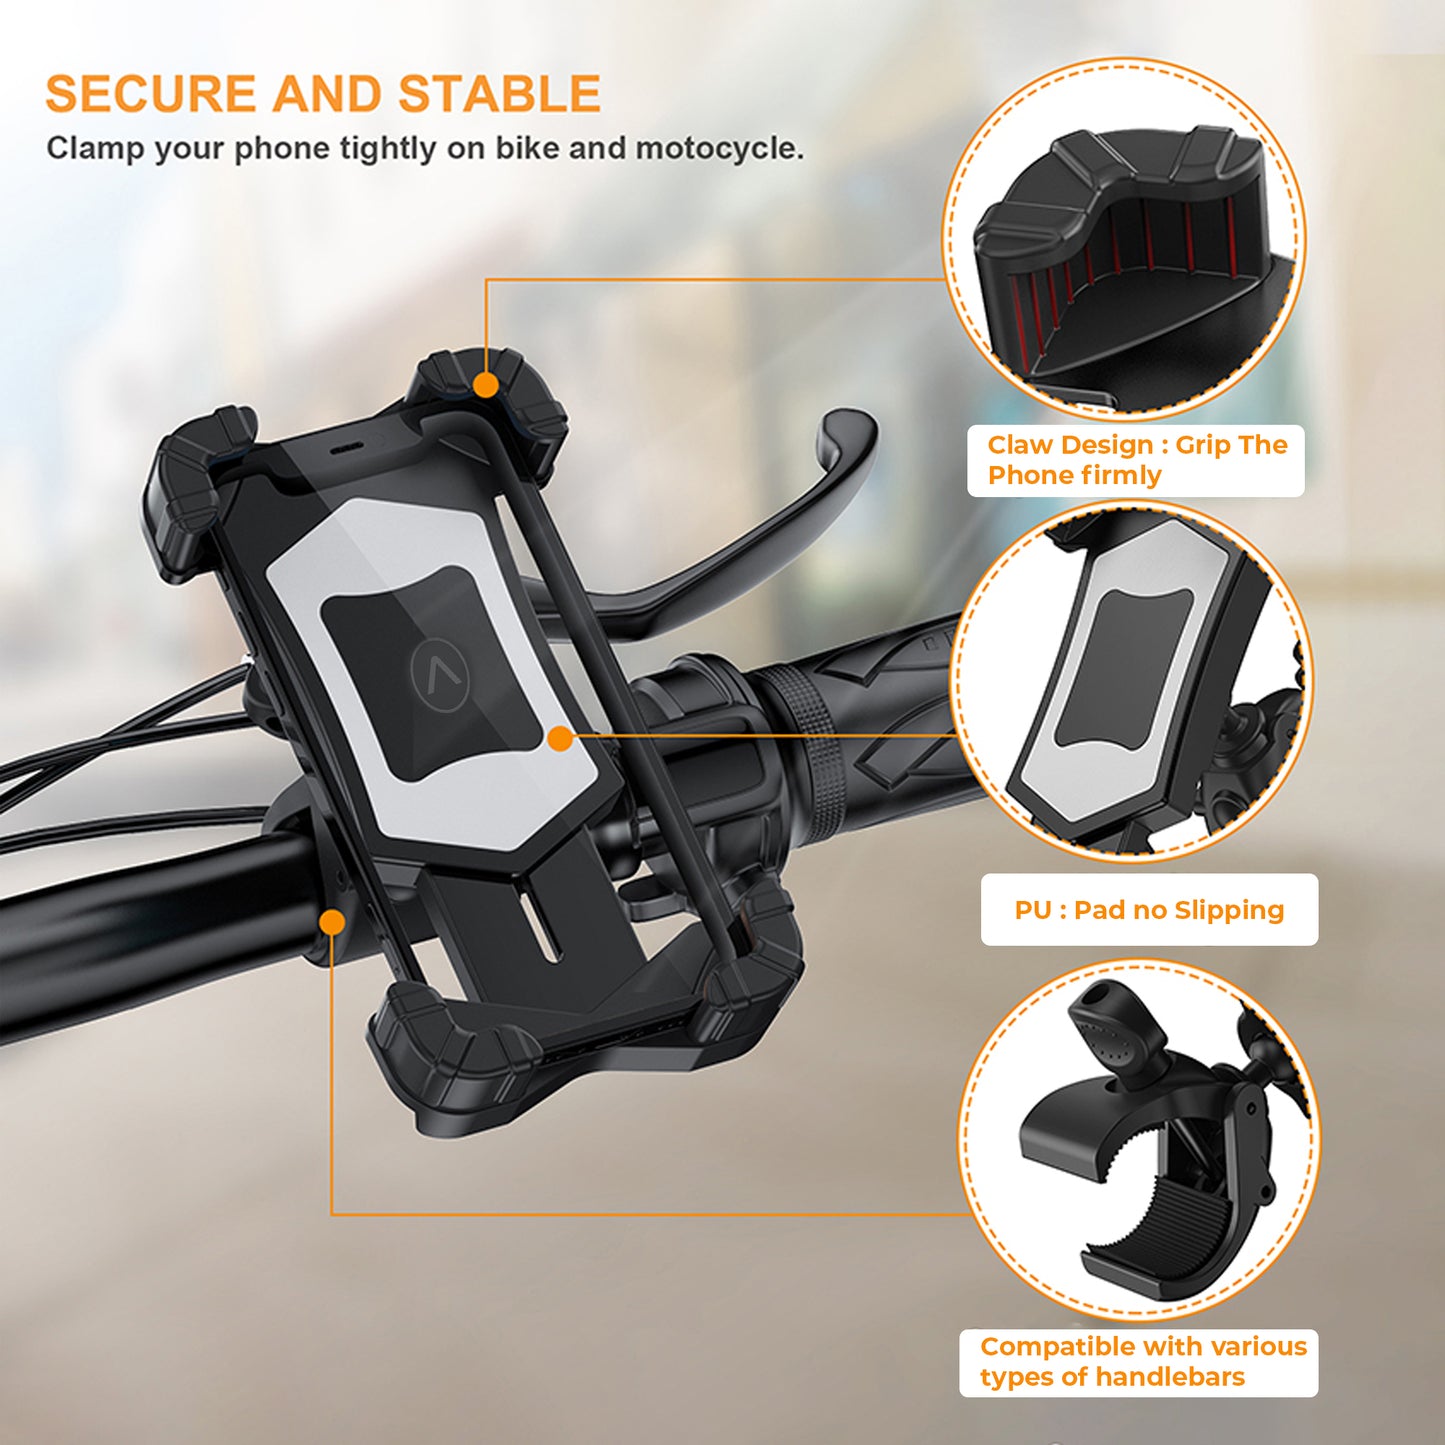 JCBL ACCESSORIES Bike Mobile Holder, High Stablized Design, Shock-Absorbing Silicone Pads, Strong Grip, Metallic Frame for 4.7 to 6.7 inch Mobiles (SL01) | Clamp your phone tightly on bike and motocycle. Vv RN \N \ y/ / El = a pa > a N\ y \ 5  ! yy’ \ | 1  A y py